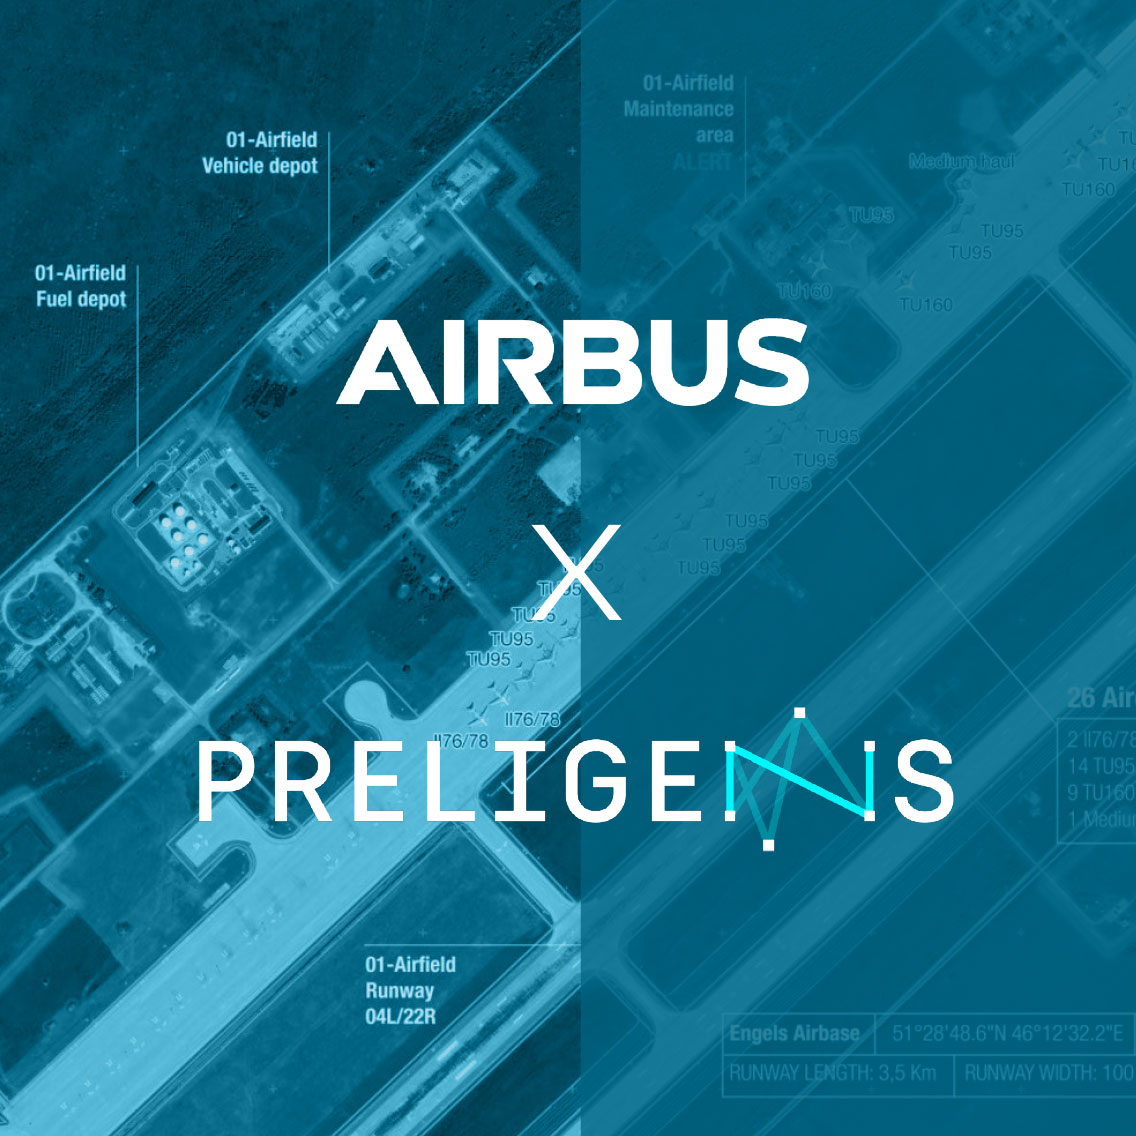 New strategic sites monitoring solution developed by Airbus and Preligens